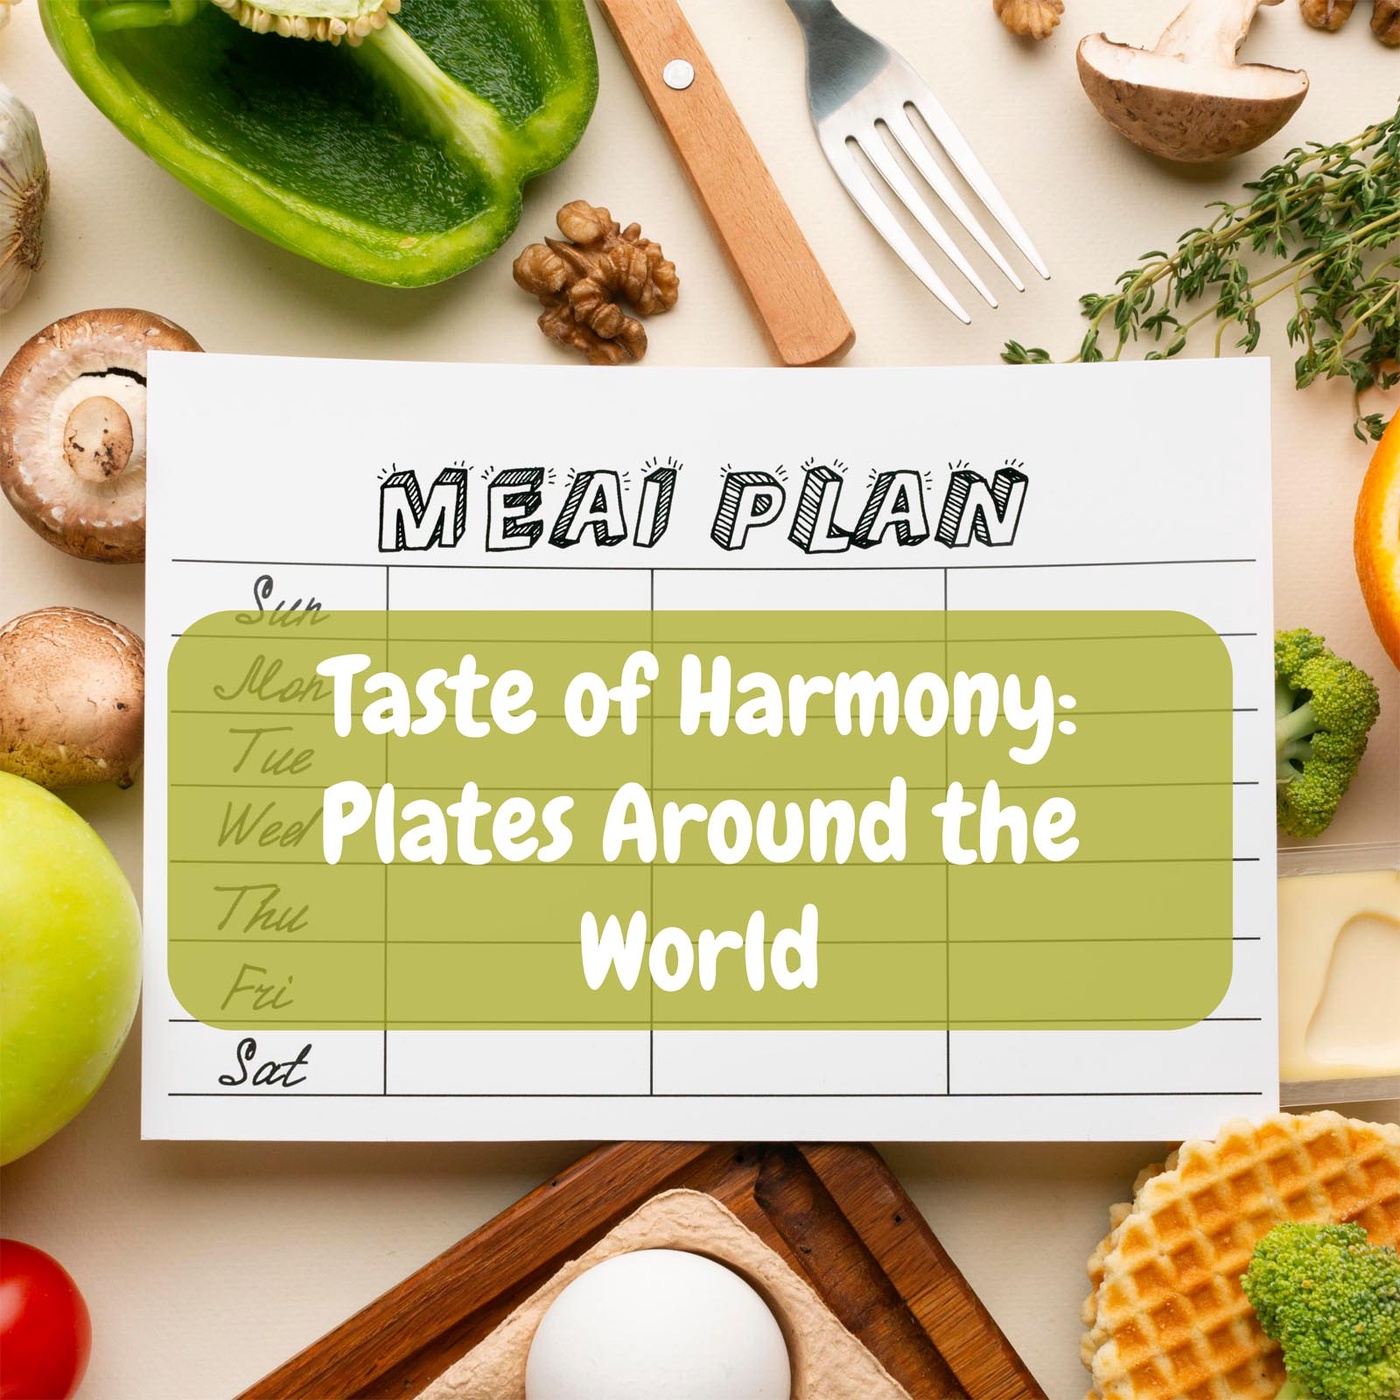 Plates Around the World: Eating Habits for Breakfast, Lunch and Dinner in Different Countries